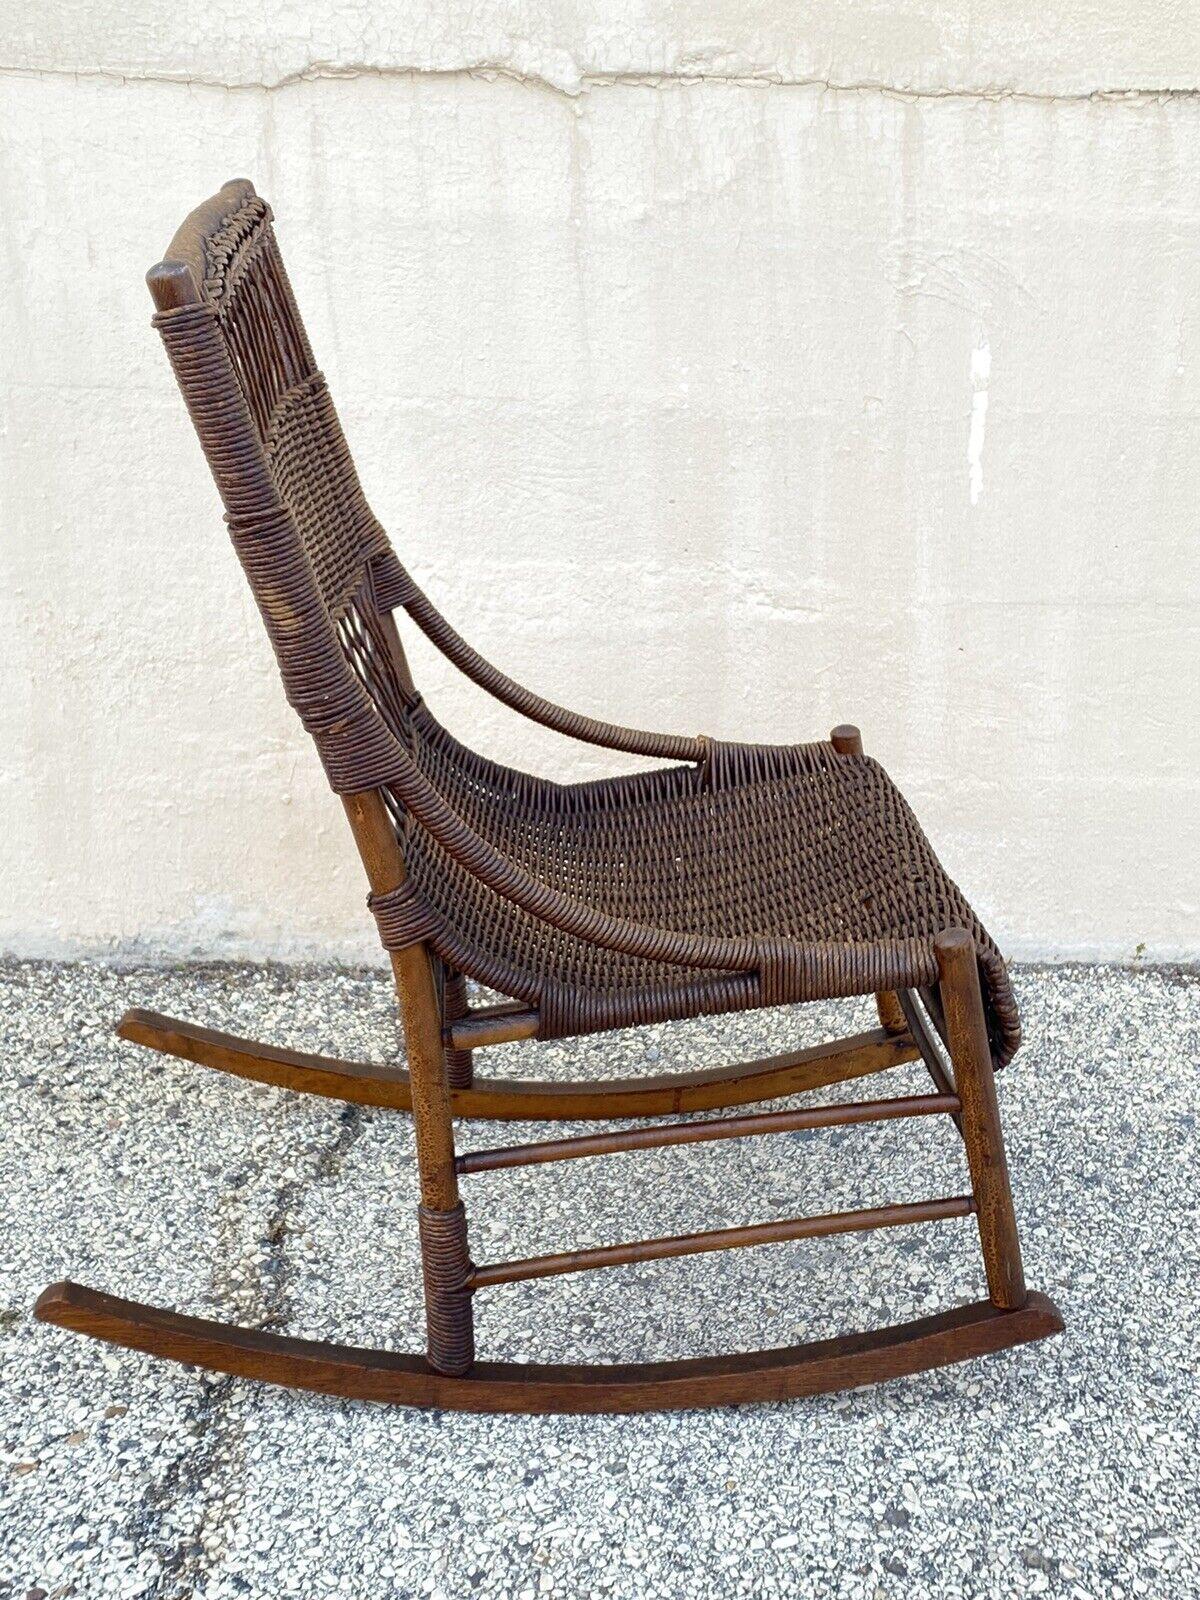 Antique Wicker and Rattan Wooden Victorian Rocking Chair Rocker For Sale 5